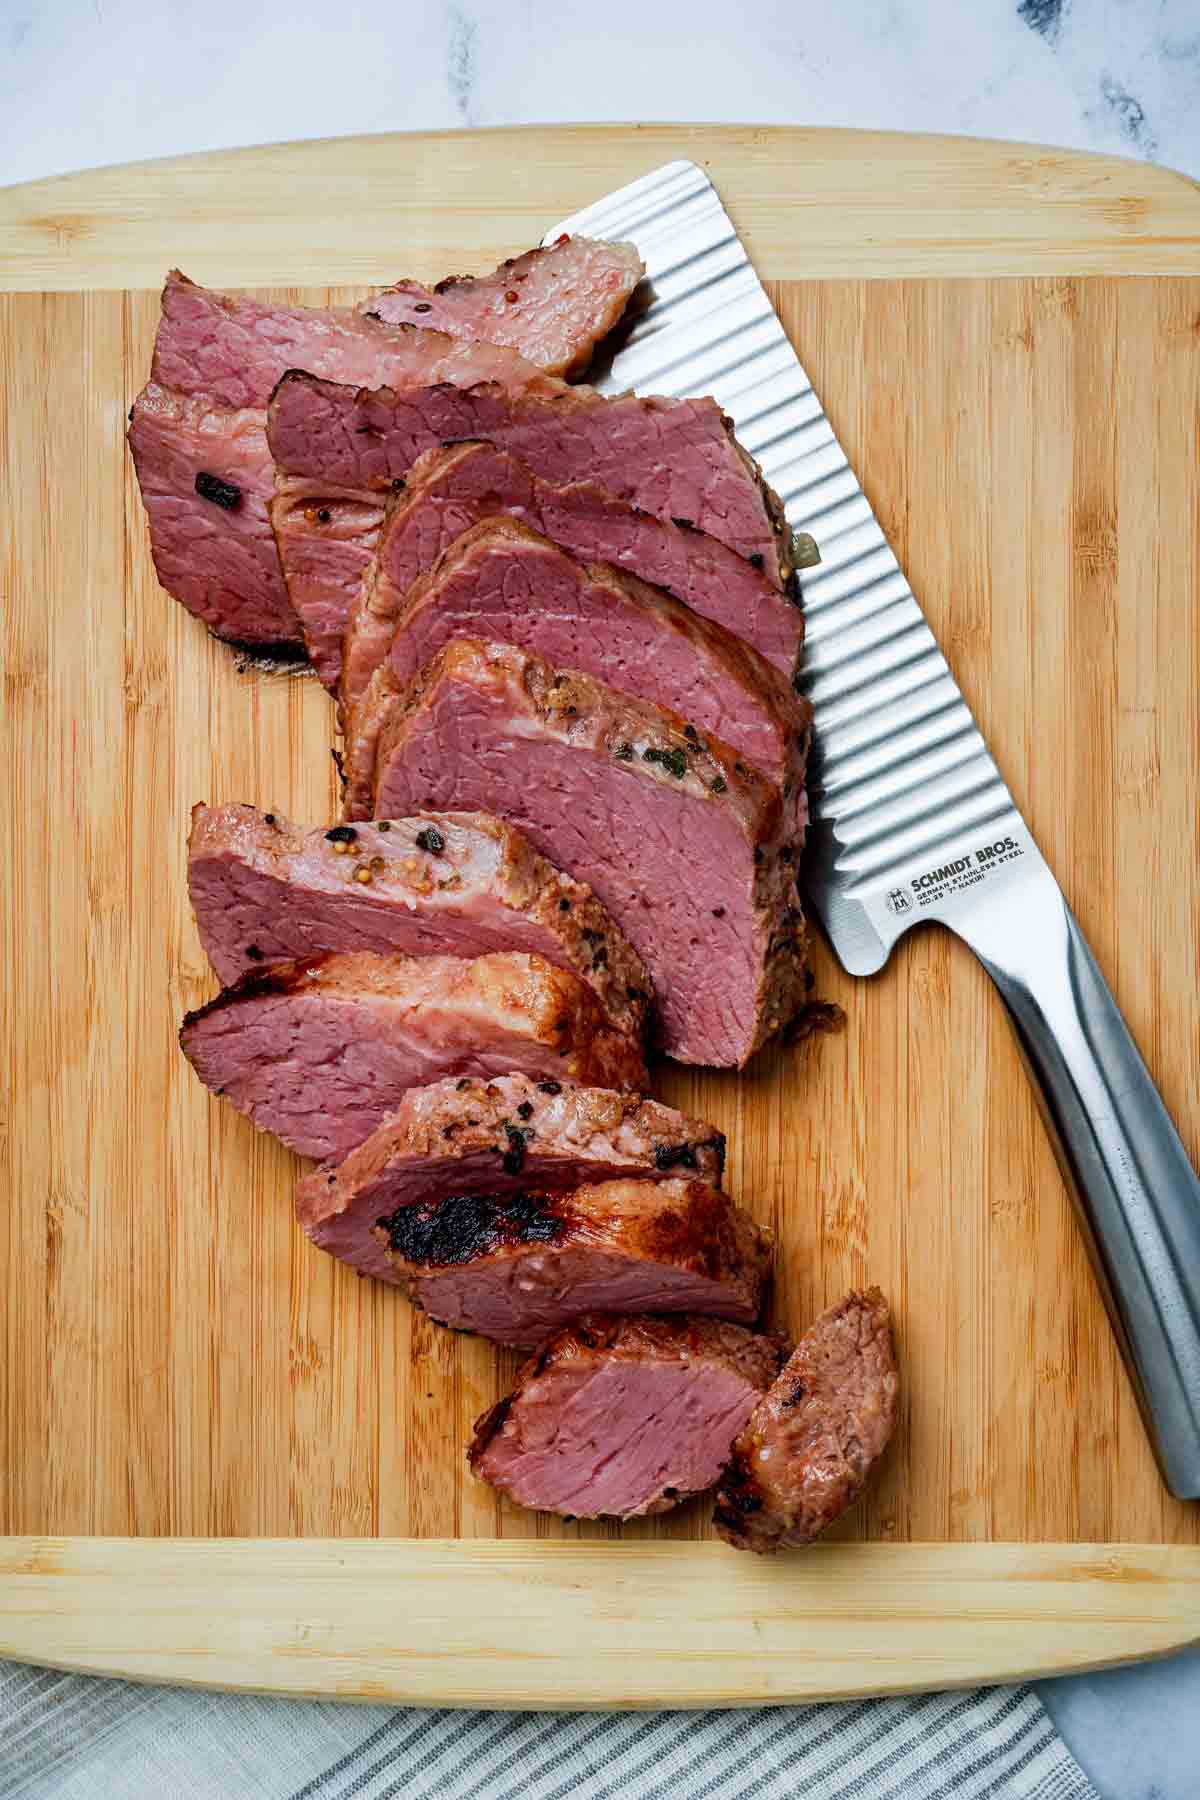 Corned beef being sliced on a wood cutting board